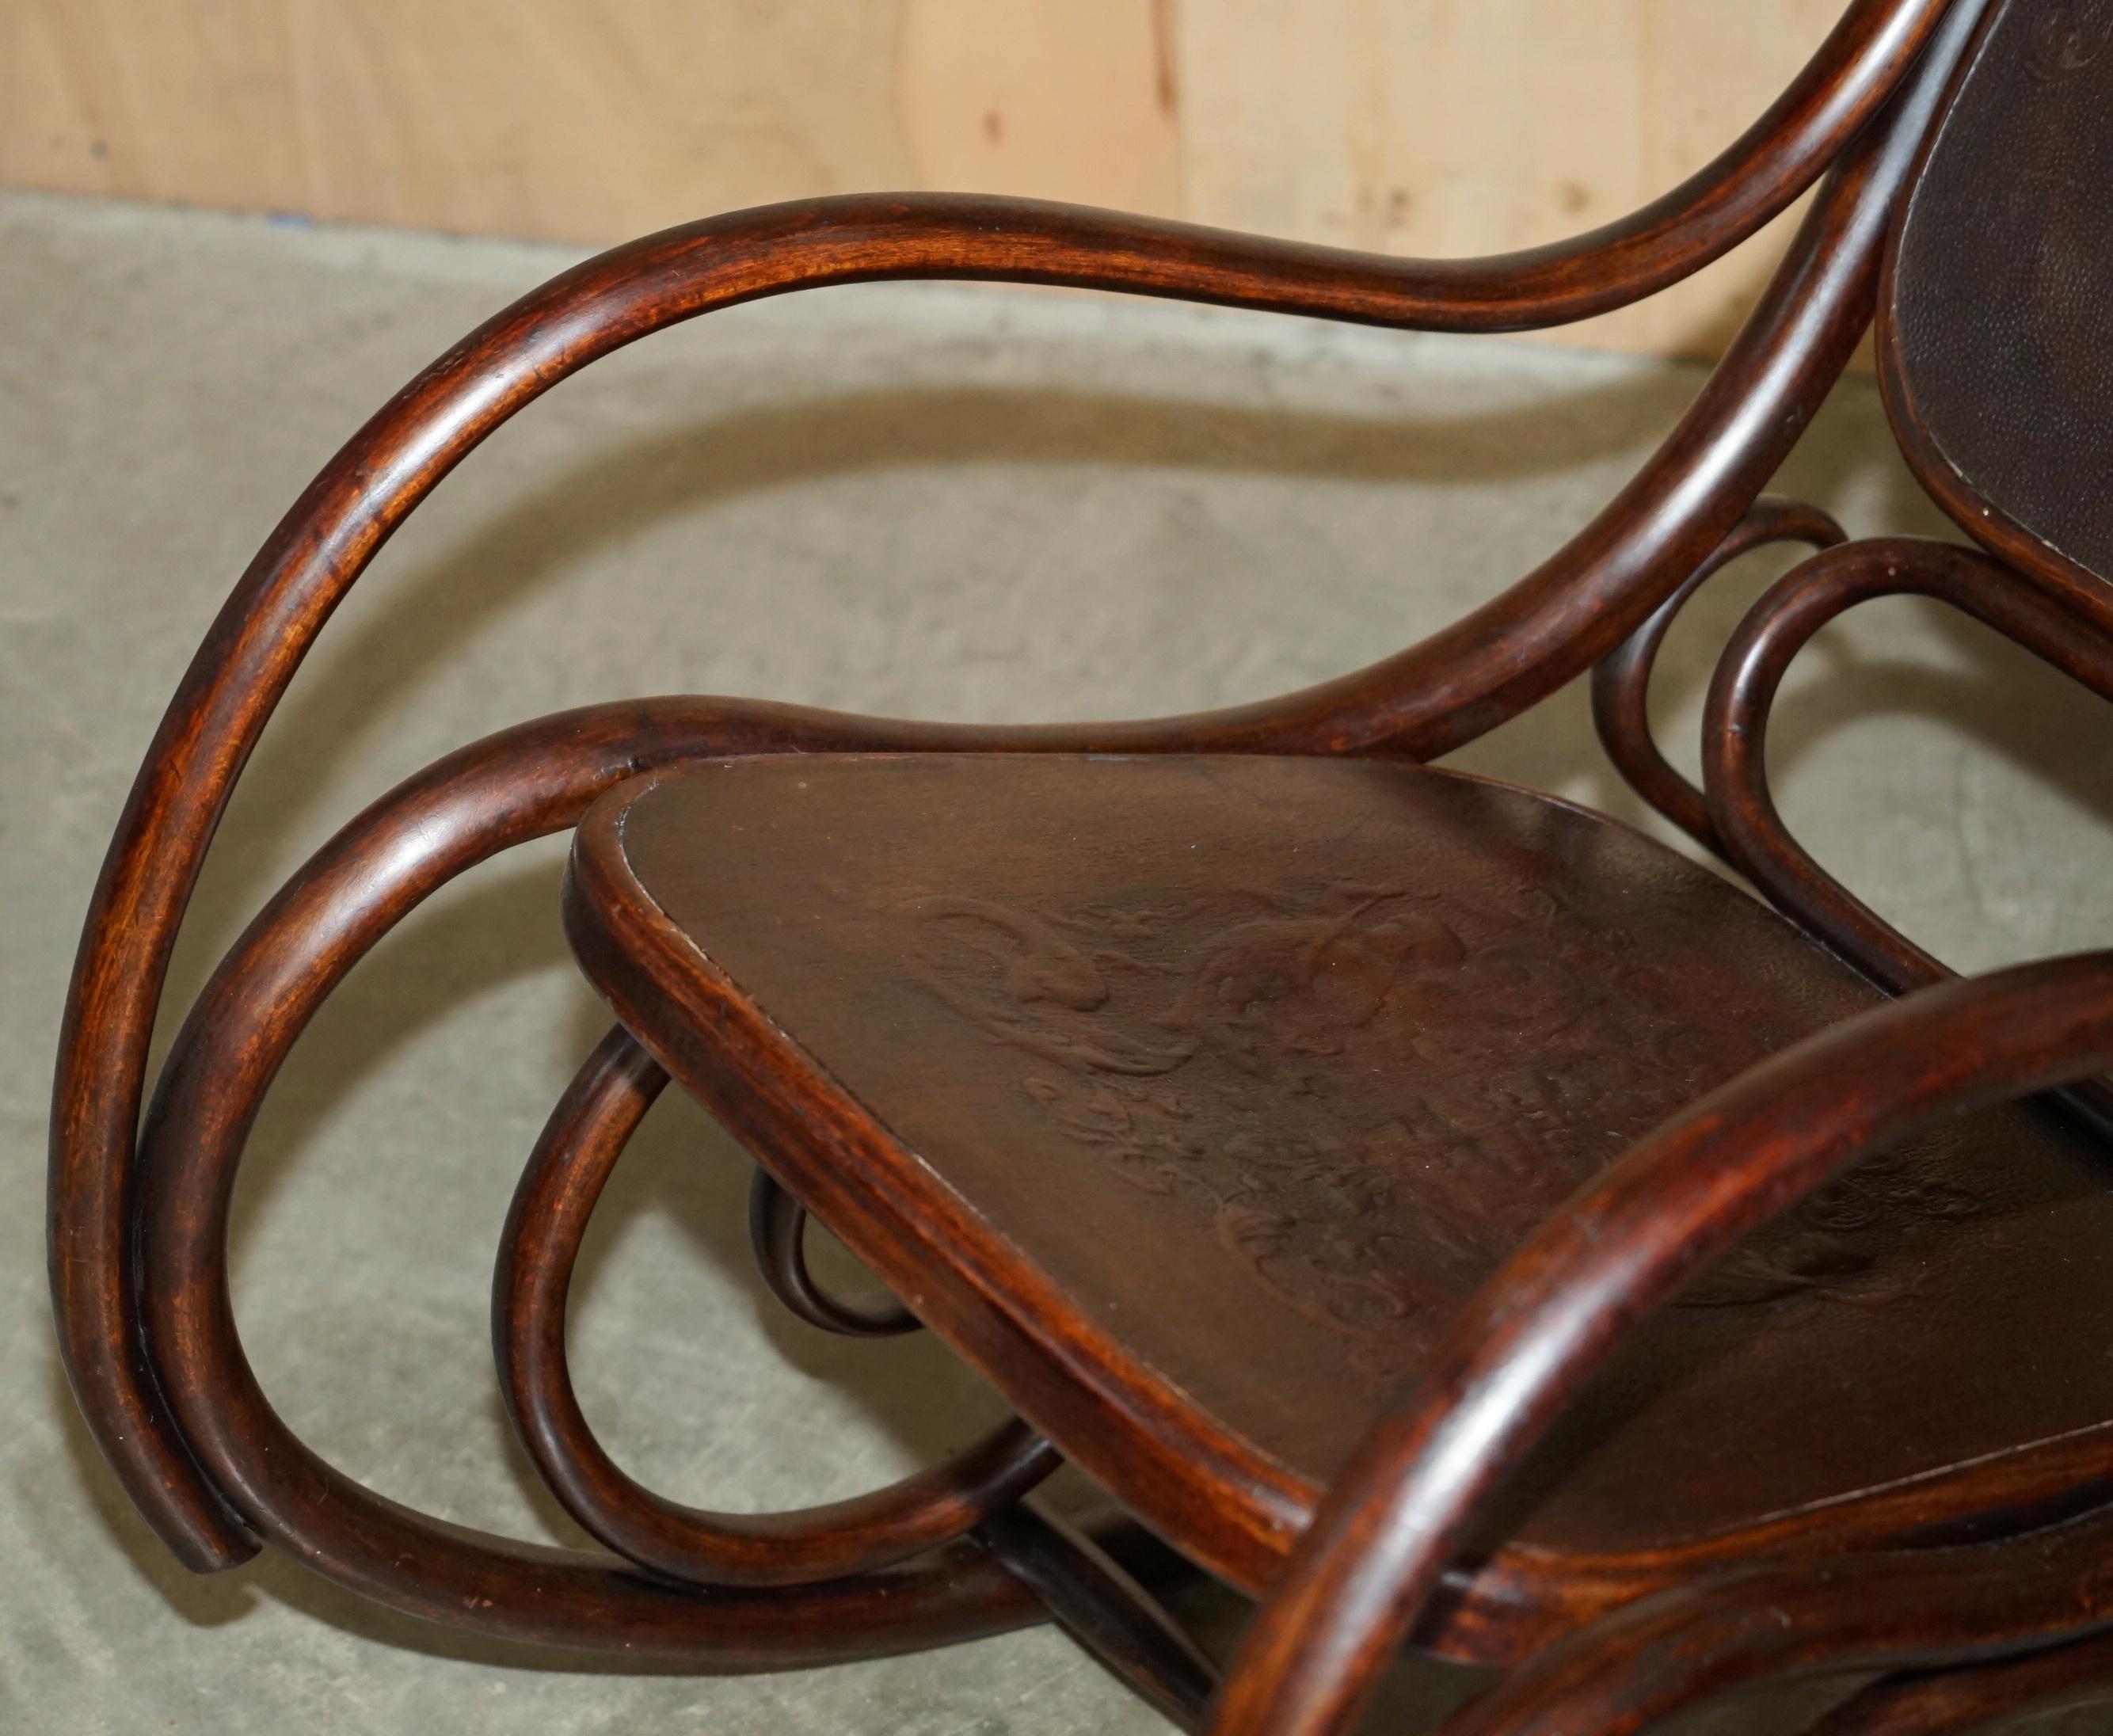 EXQUISITE ViCTORIAN THONET ROCKING CHAIR WITH CHERUB CARVED BACK & SEAT PANELS For Sale 3